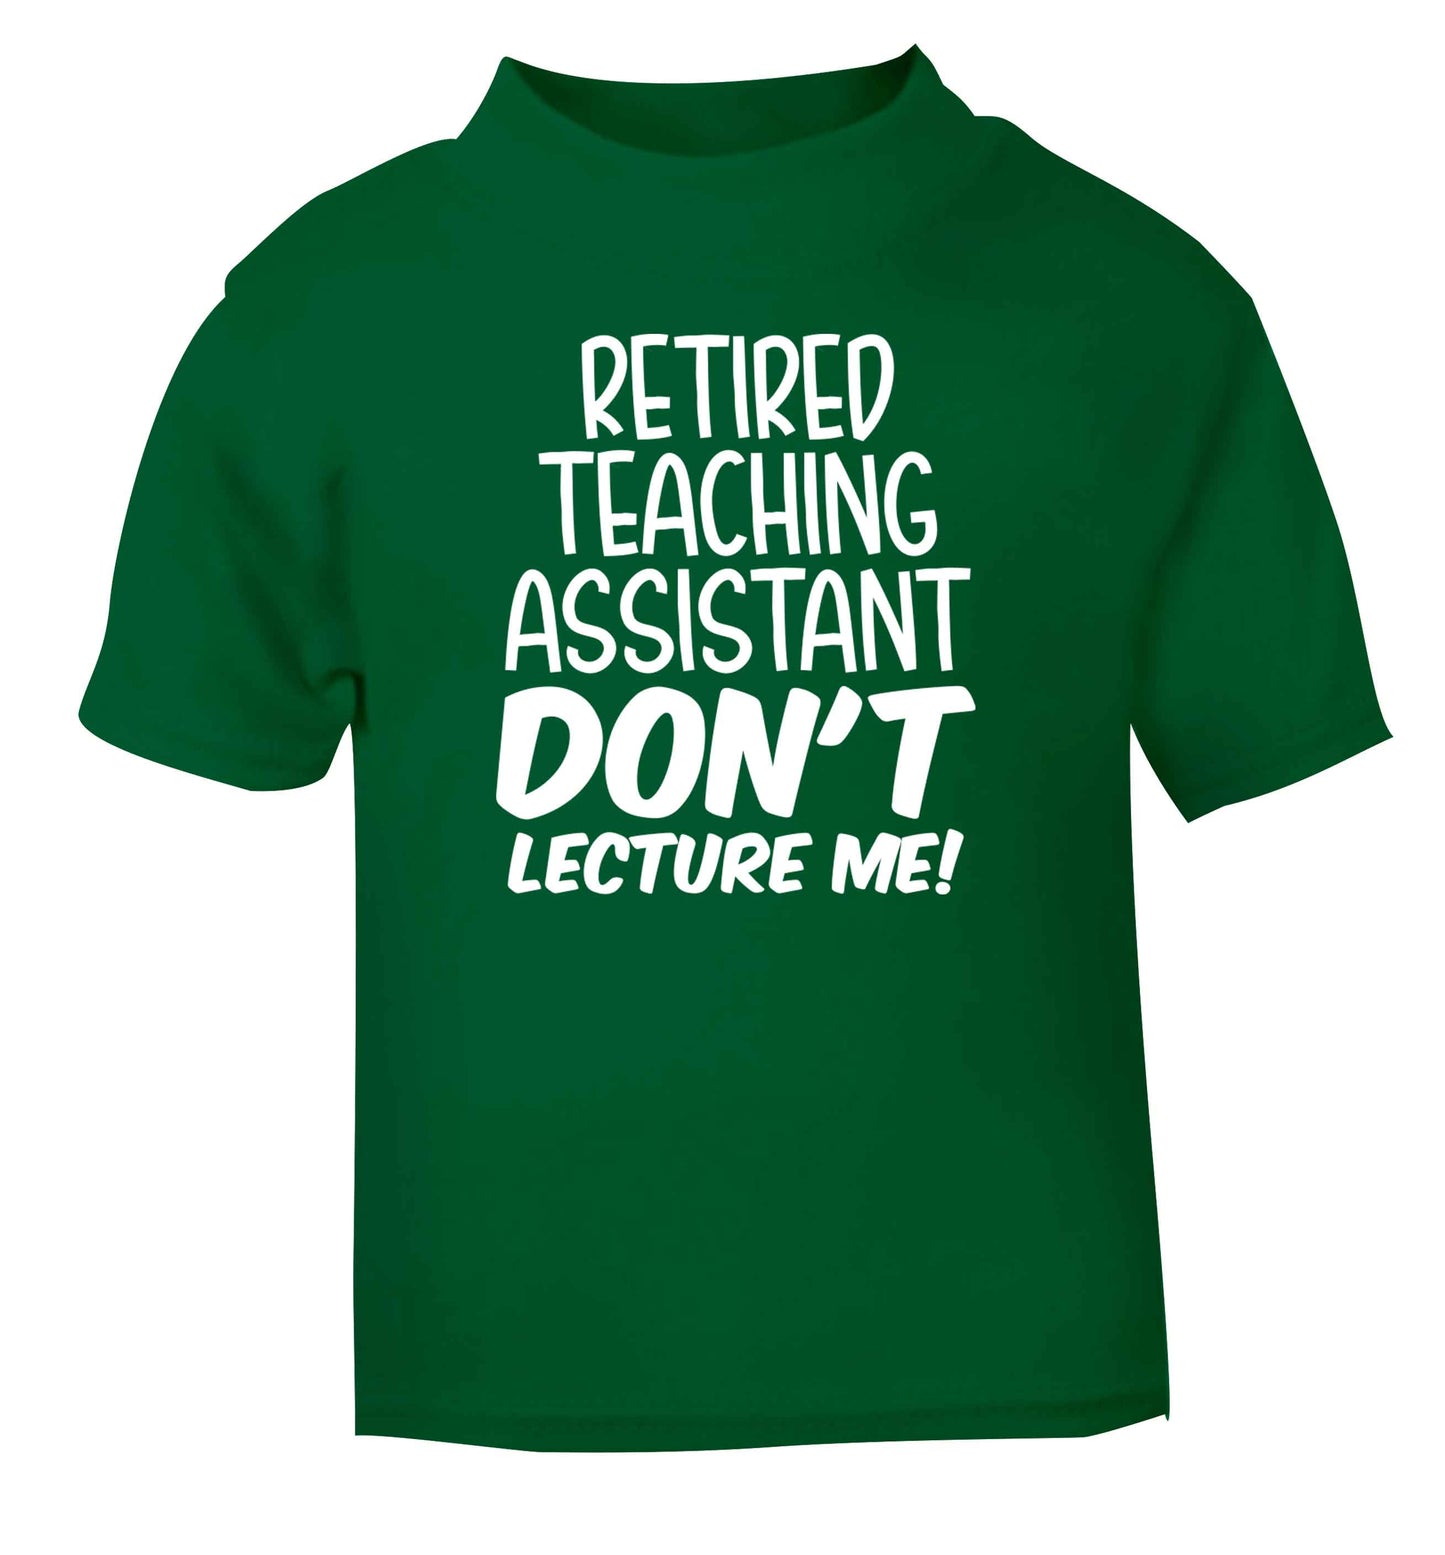 Retired teaching assistant don't lecture me green Baby Toddler Tshirt 2 Years